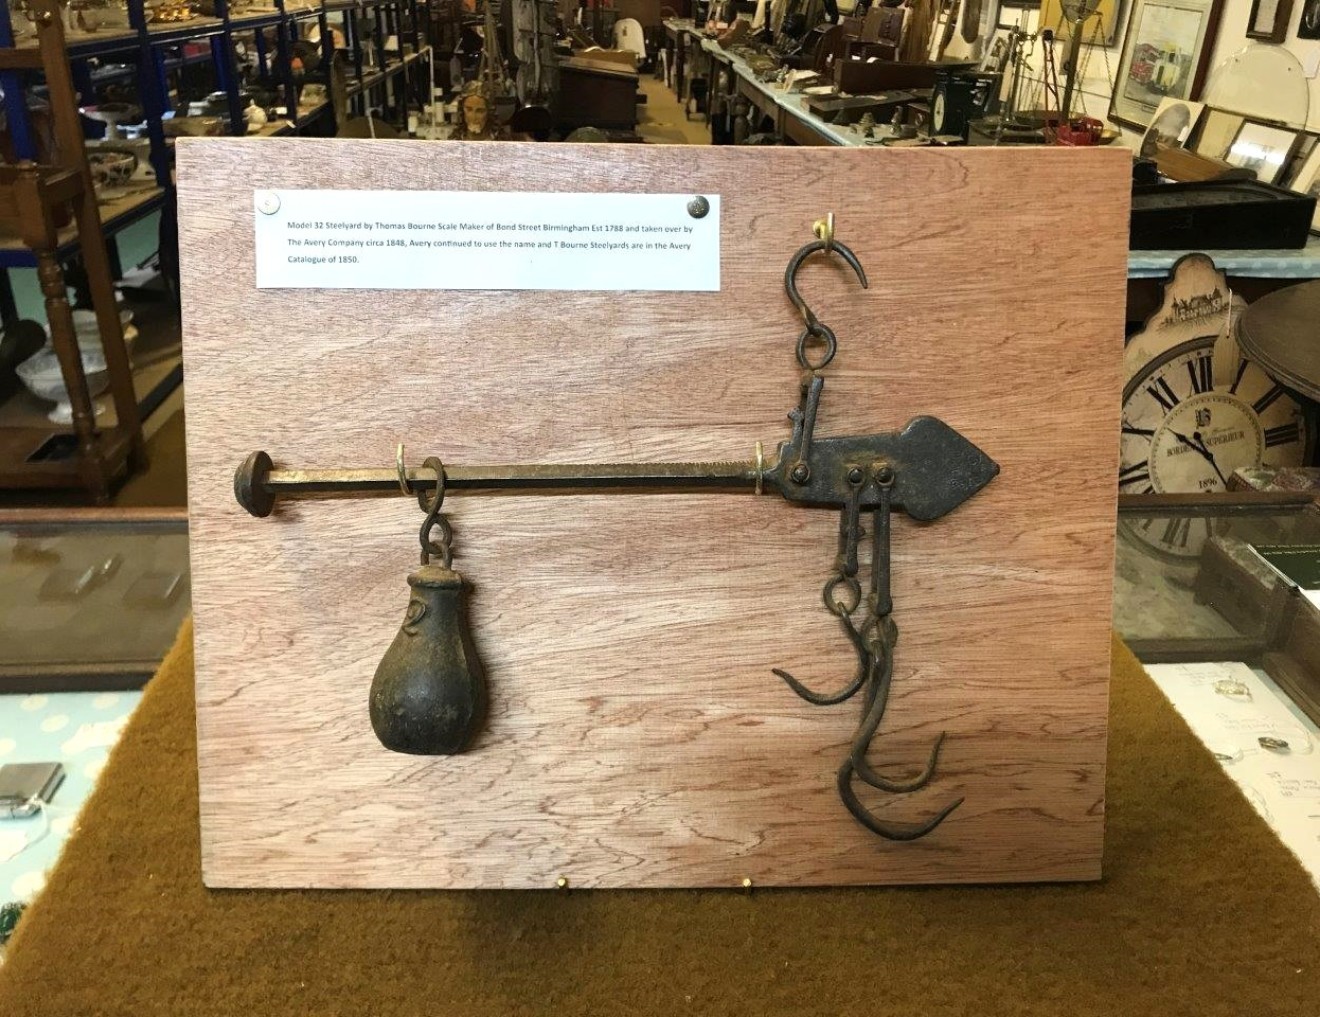 Antique Steelyard / PeaScale Weighing Apparatus Marked T Bourne 32 for Thomas Bourne Birmingham Scale Beam Maker Circa 1830s